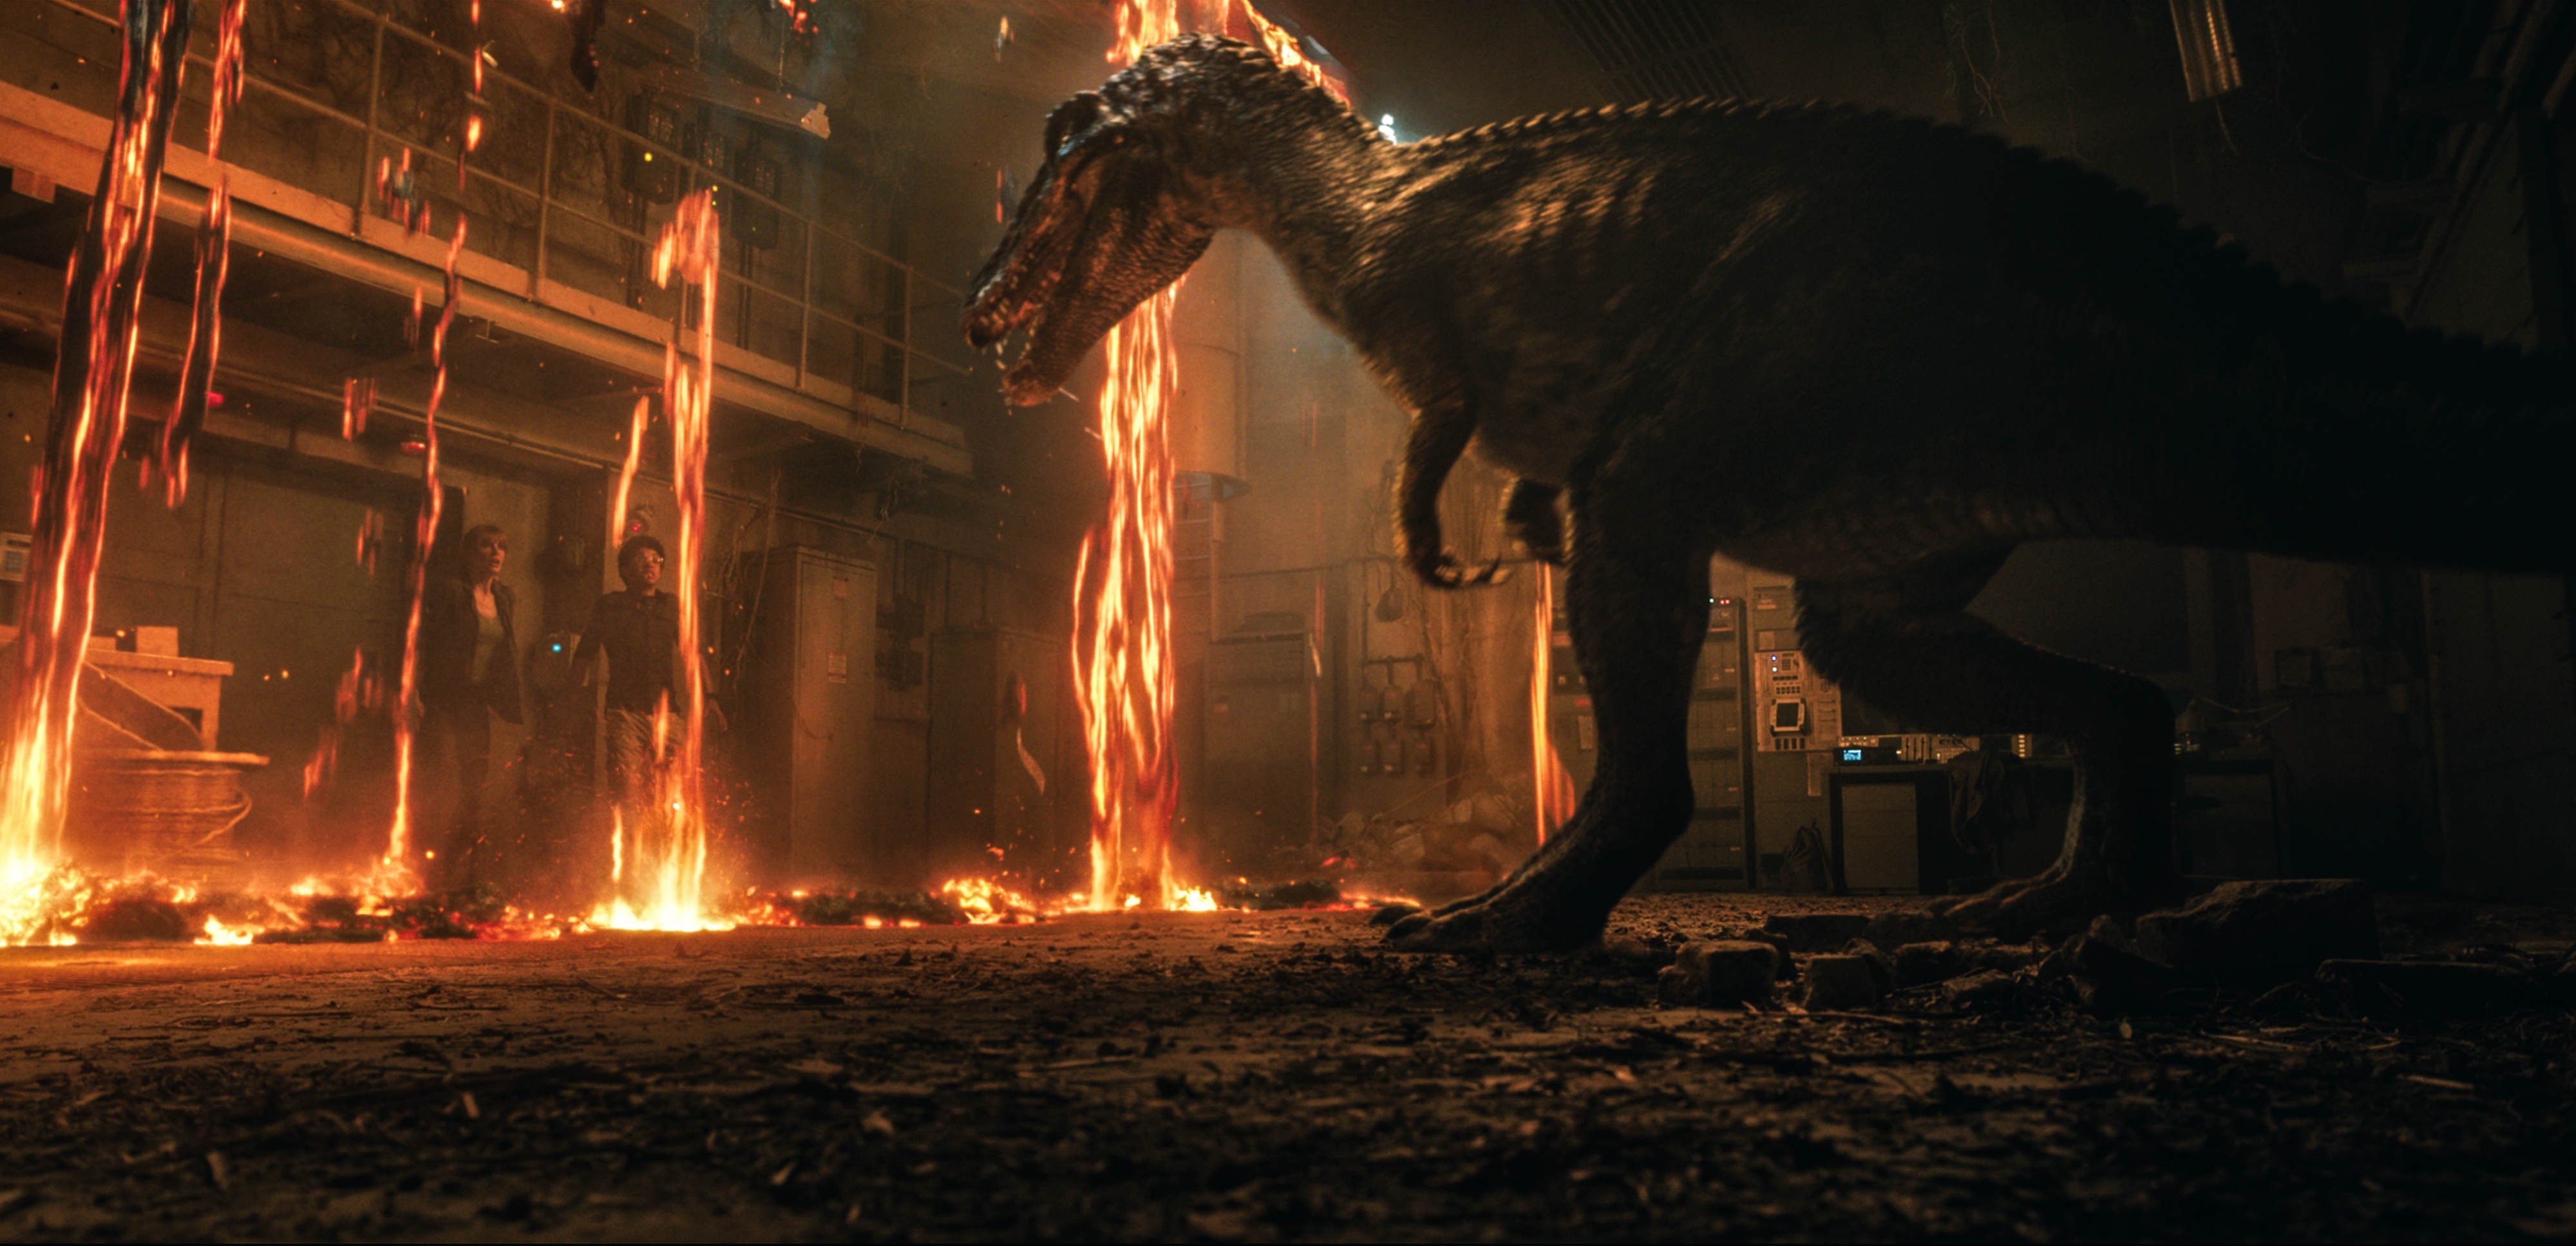 Does the return of dinosaurs, especially a genetically modified one created for Jurassic World, signal the end of the world as we know it? - COURTESY OF UNIVERSAL PICTURES, AMBLIN ENTERTAINMENT AND LEGENDARY PICTURES